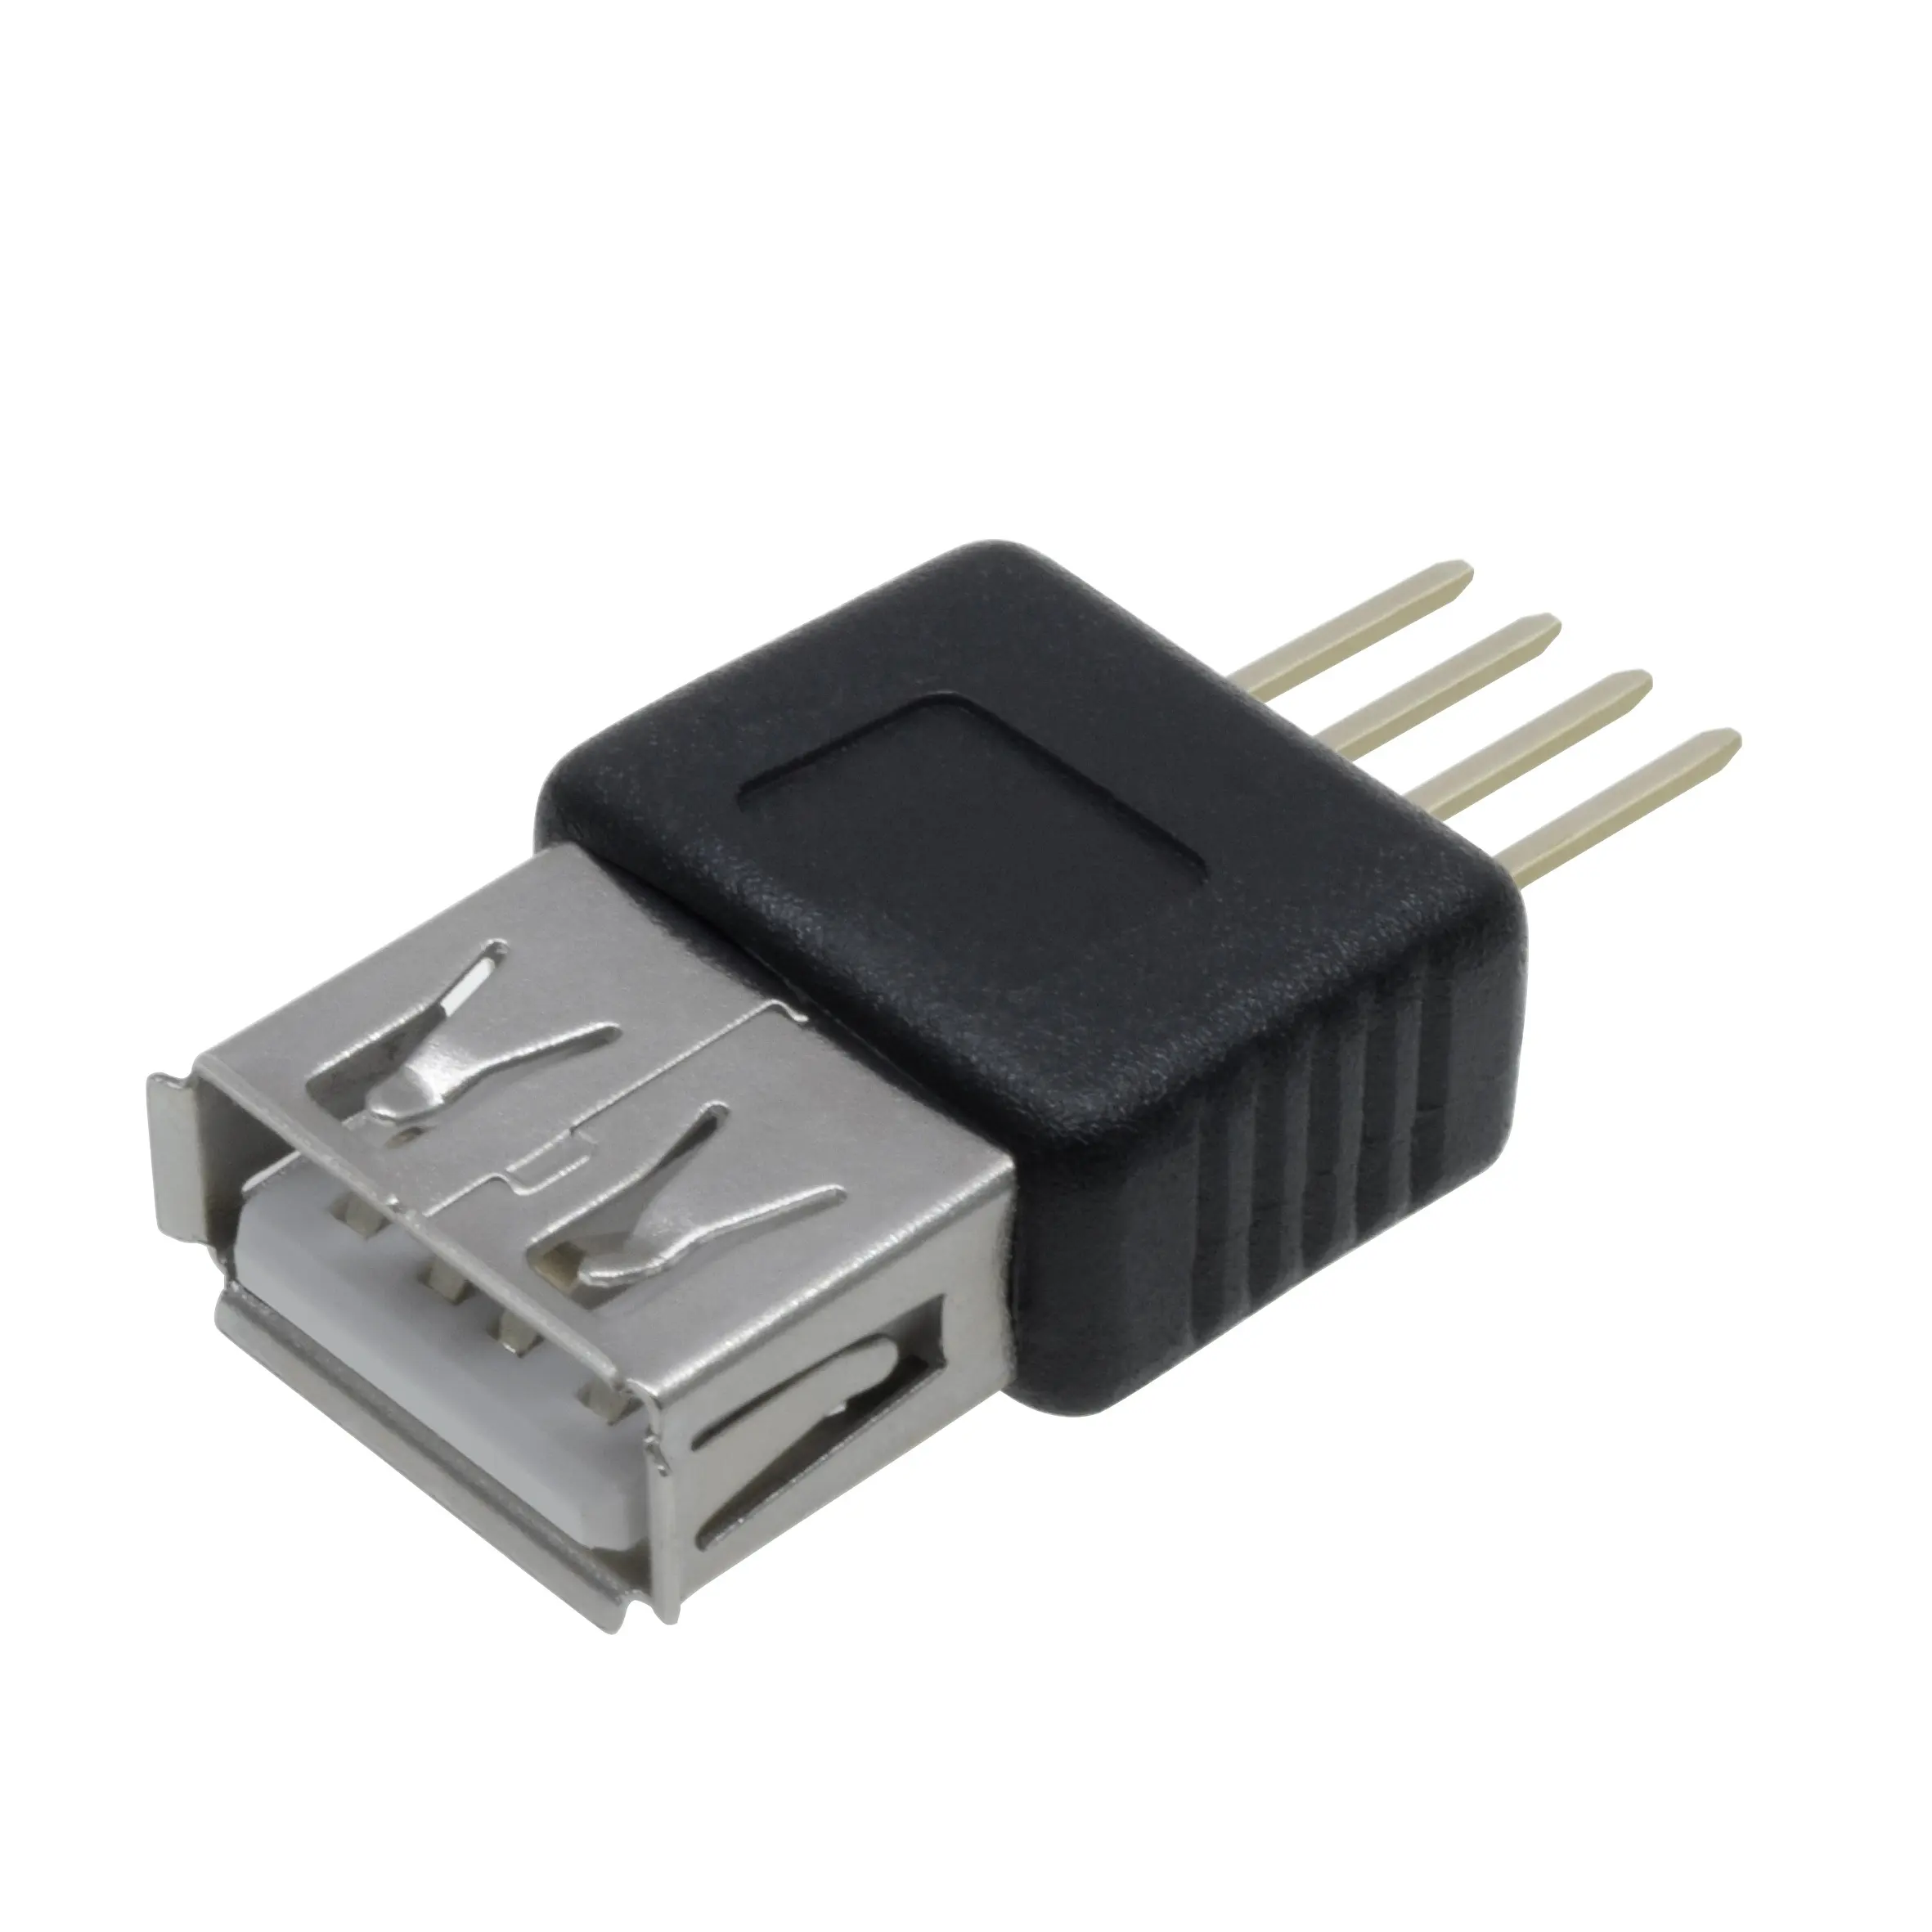 USB A Type 2.0A 5.0V 2.54 Pitch Female 180 Degree Copper 4 PIN Connector DIP Vertical Mount to Circuit Board